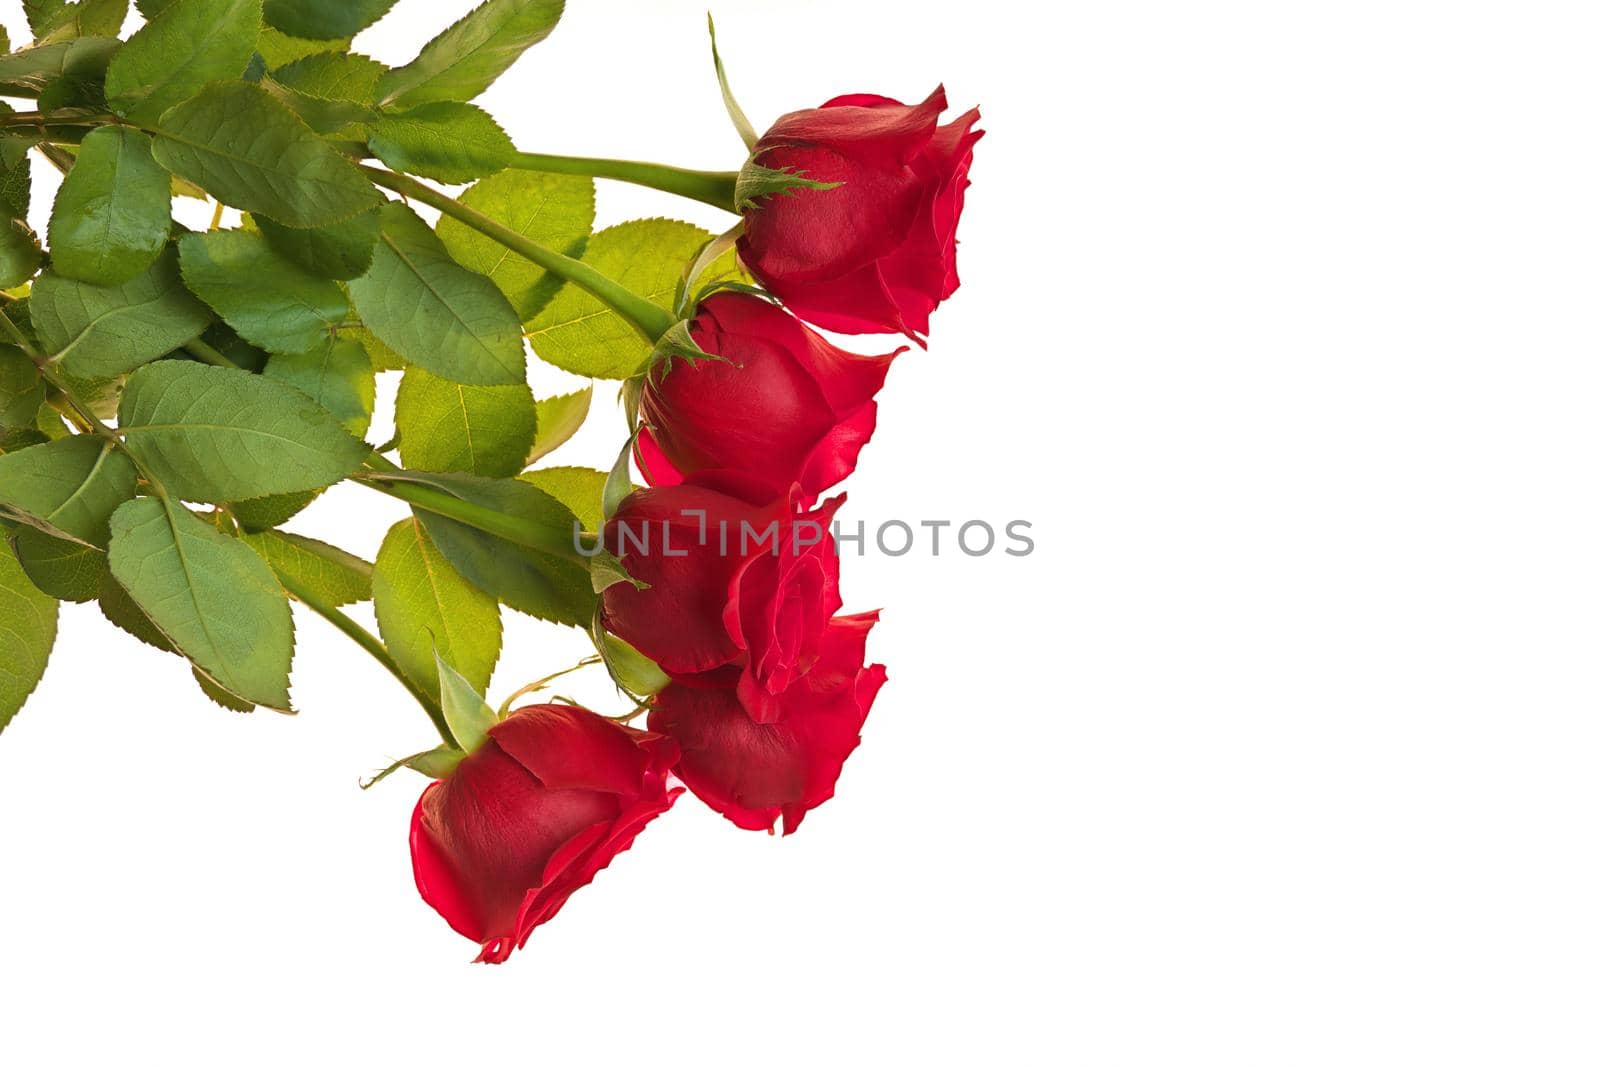 Directly Above Overhead View of Red Rose Bouquet Isolated on a White Studio Background. Copy space right. High quality studio photo